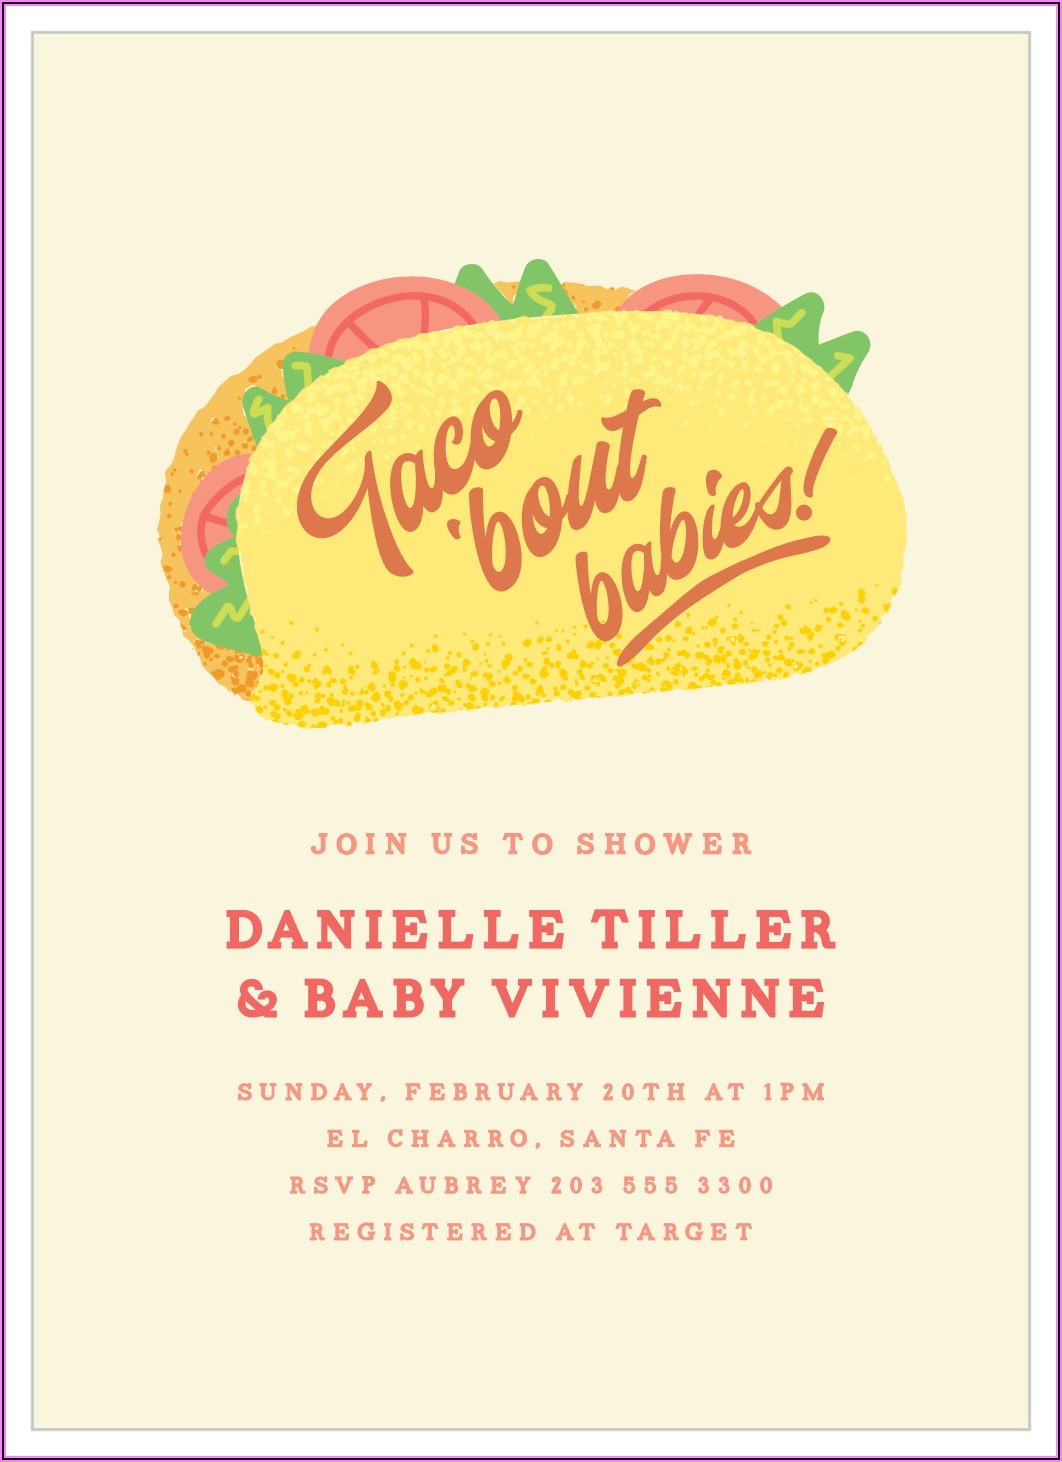 Lets Taco Bout A Baby Invitations